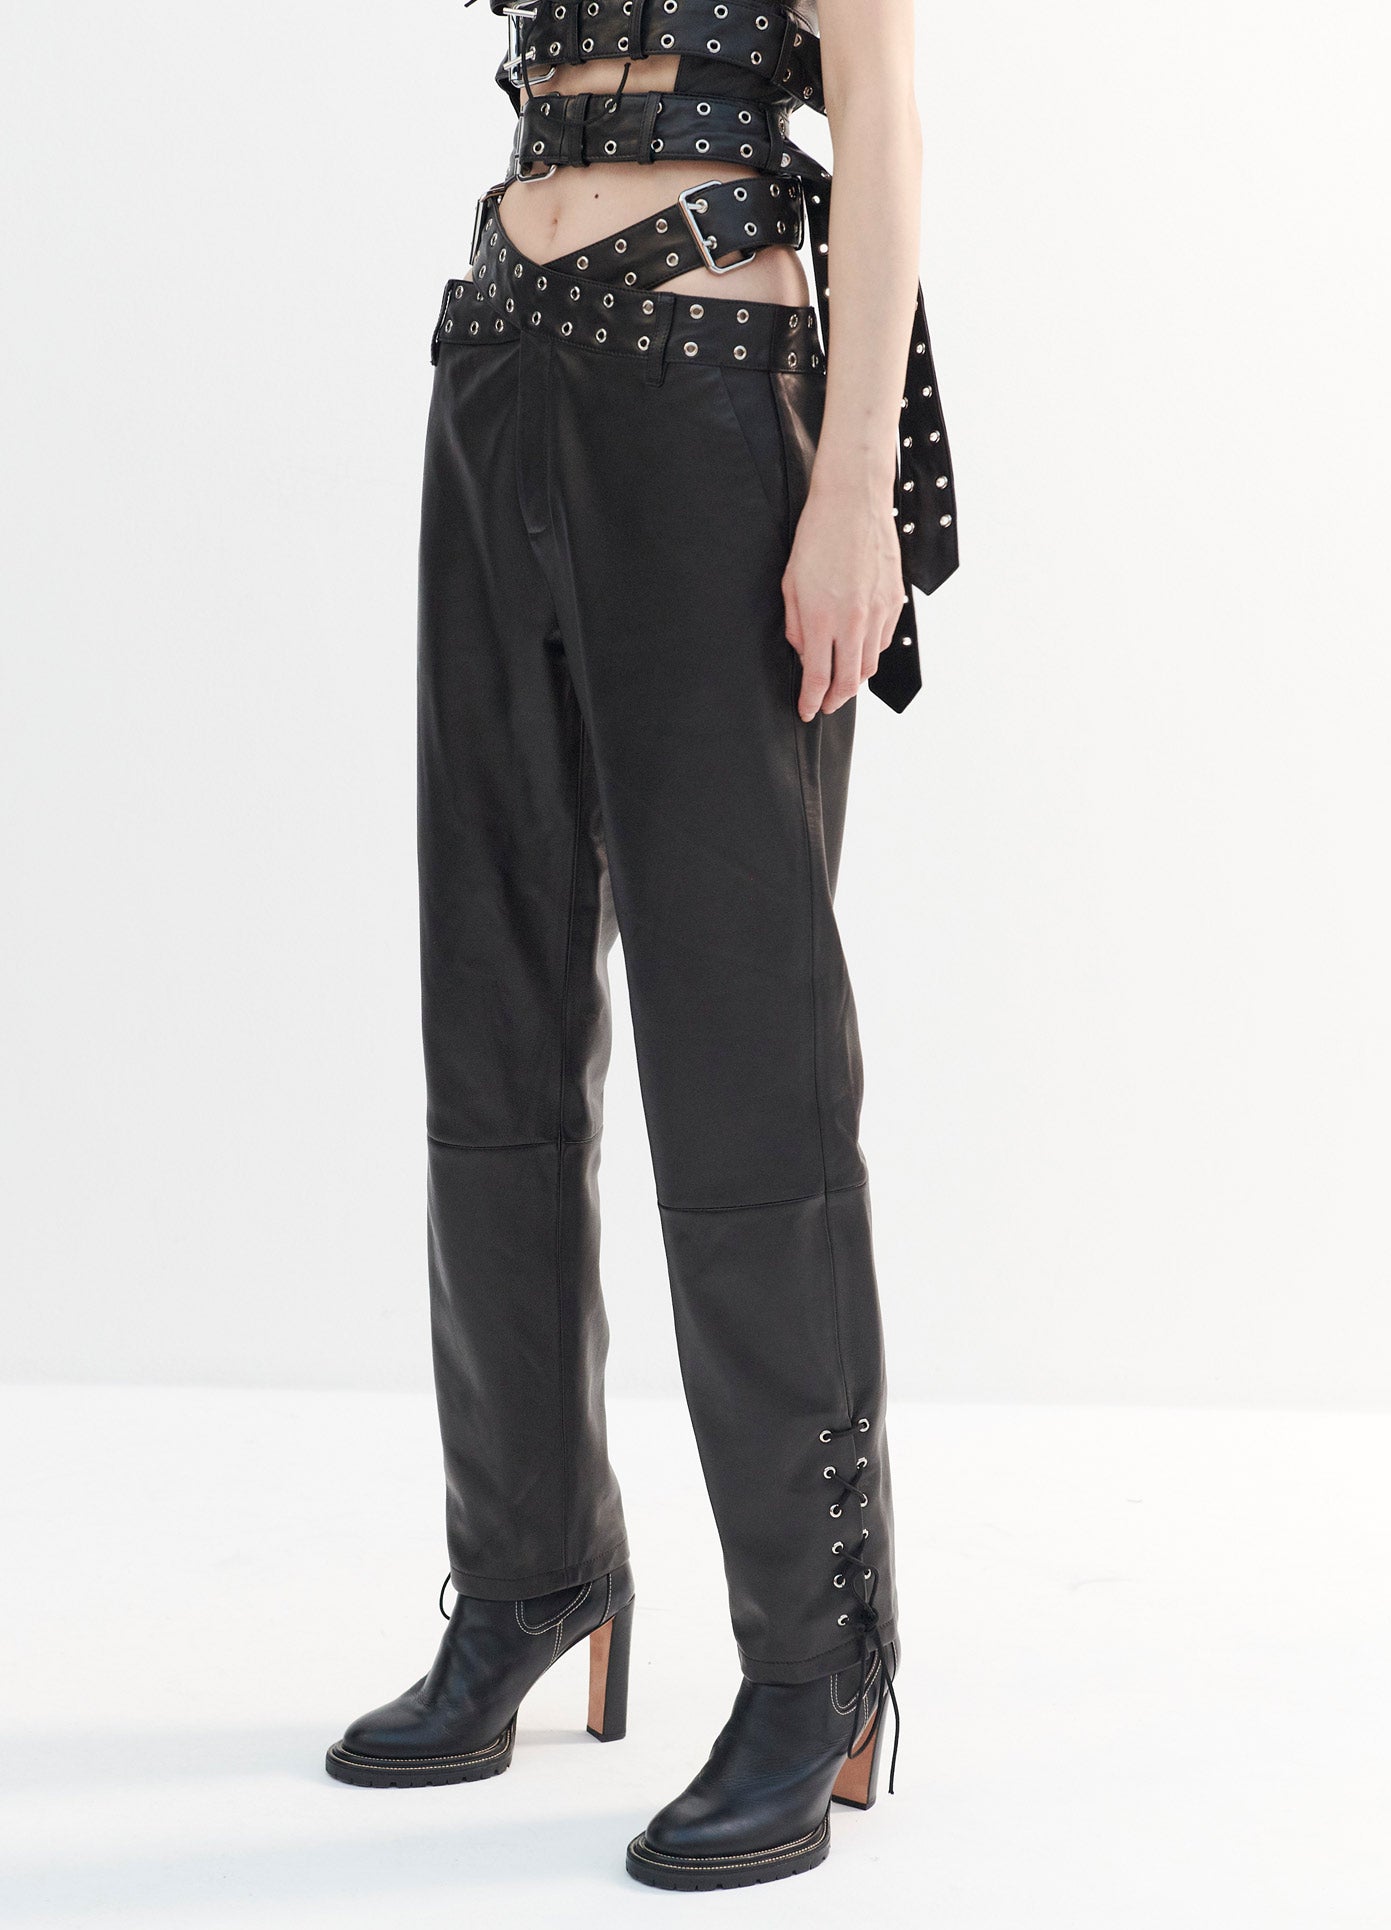 MONSE Leather Criss Cross Trousers in Black on Model Front Detail View